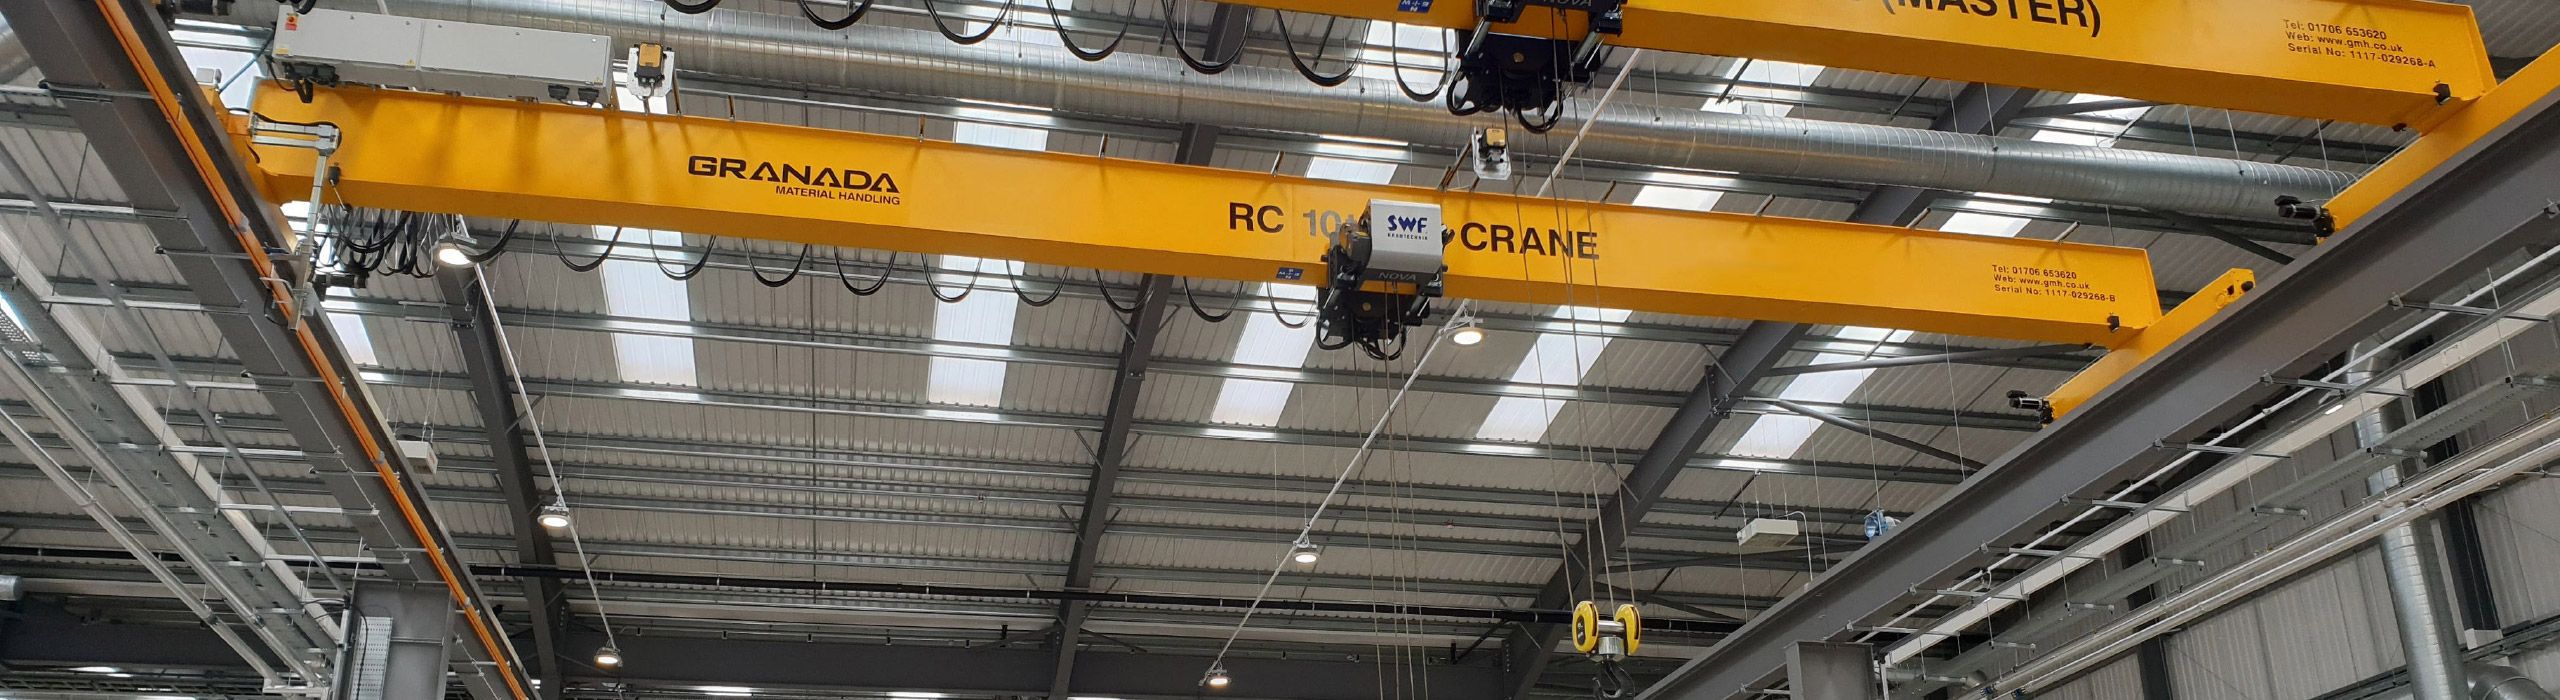 Innovative overhead cranes, smart controls and software